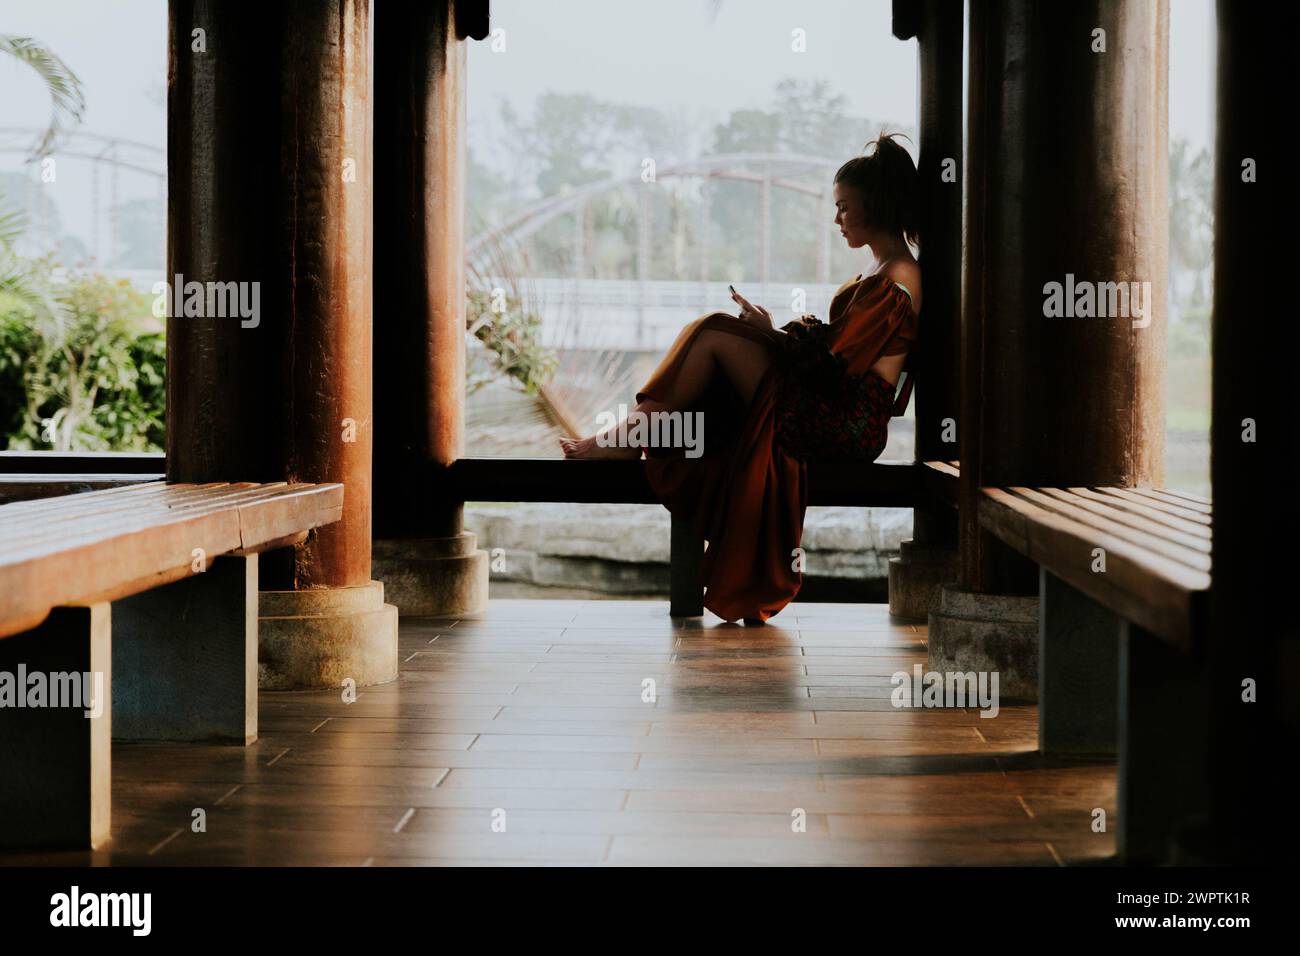 Silhouette of a girl using her smartphone sitting on a bench. Stock Photo